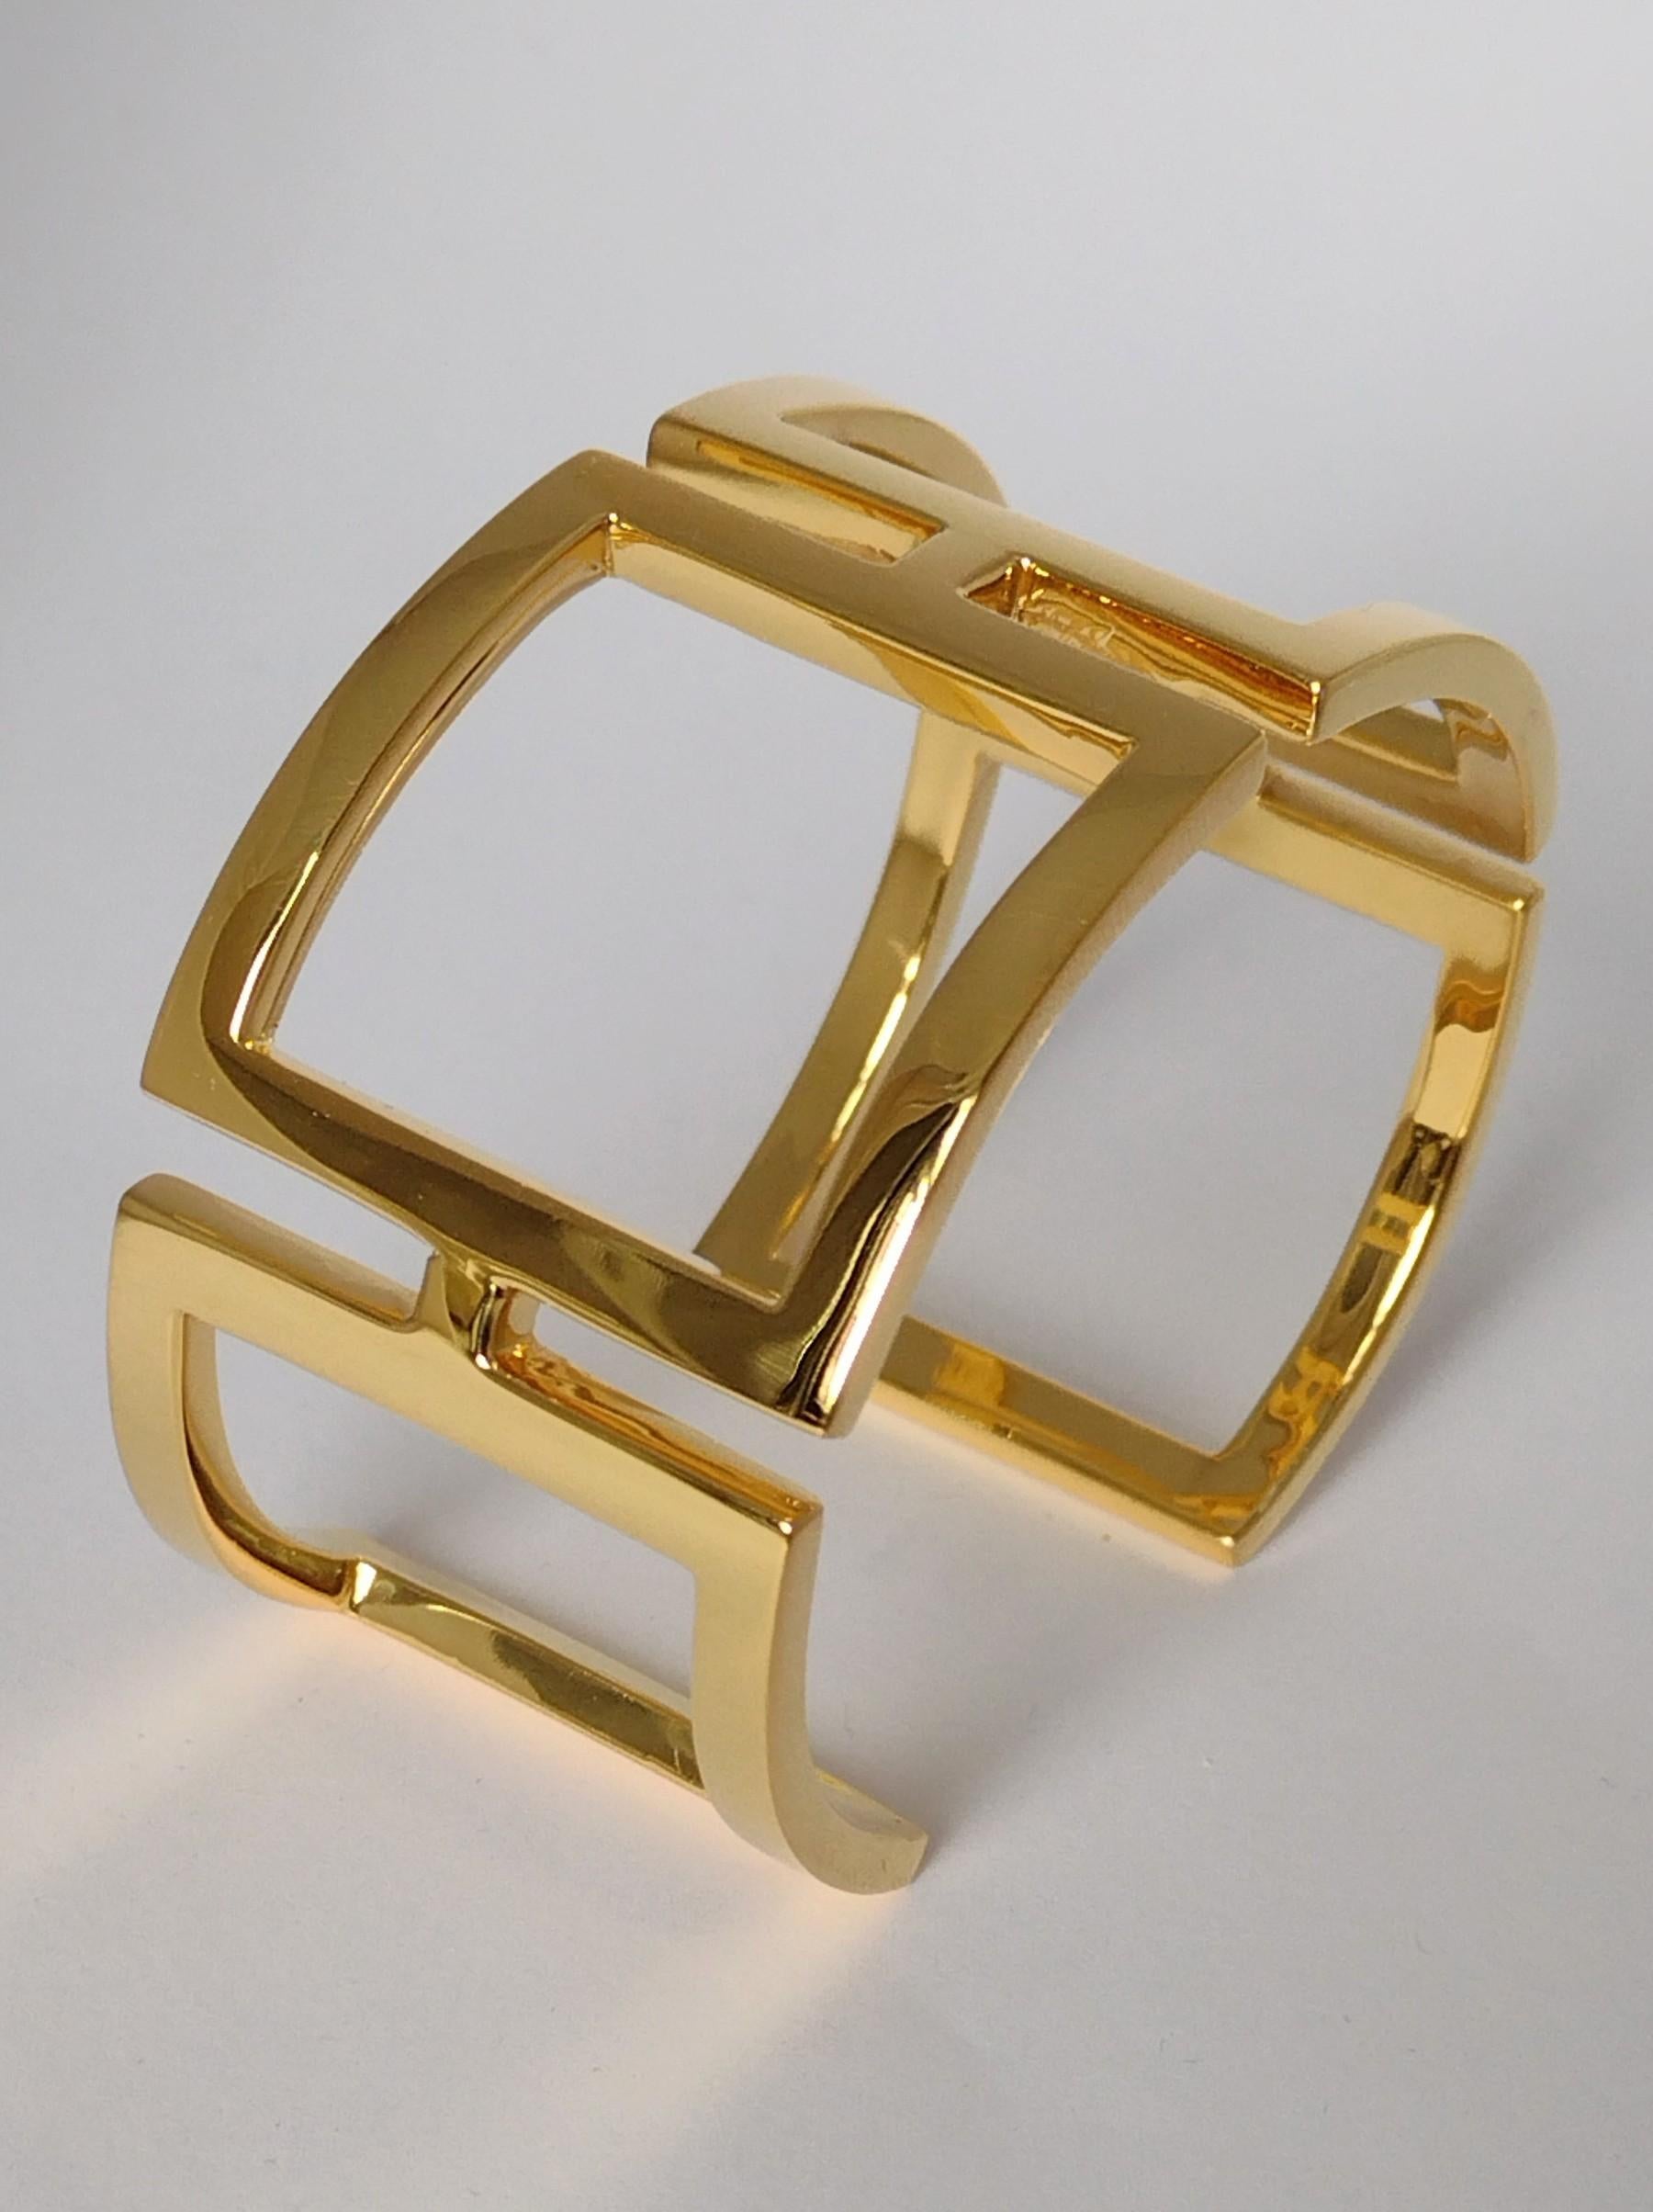 Tiffany designer , Thomas Kurilla created this 18k Yellow Gold Plated Rectangle Cuff Bracelet , 3 x 1.5 mm thick x  mm 31 .25 wide. This is one of my early designs and was sold in Tiffany's in sterling. I was using the simple rectangle in a curved